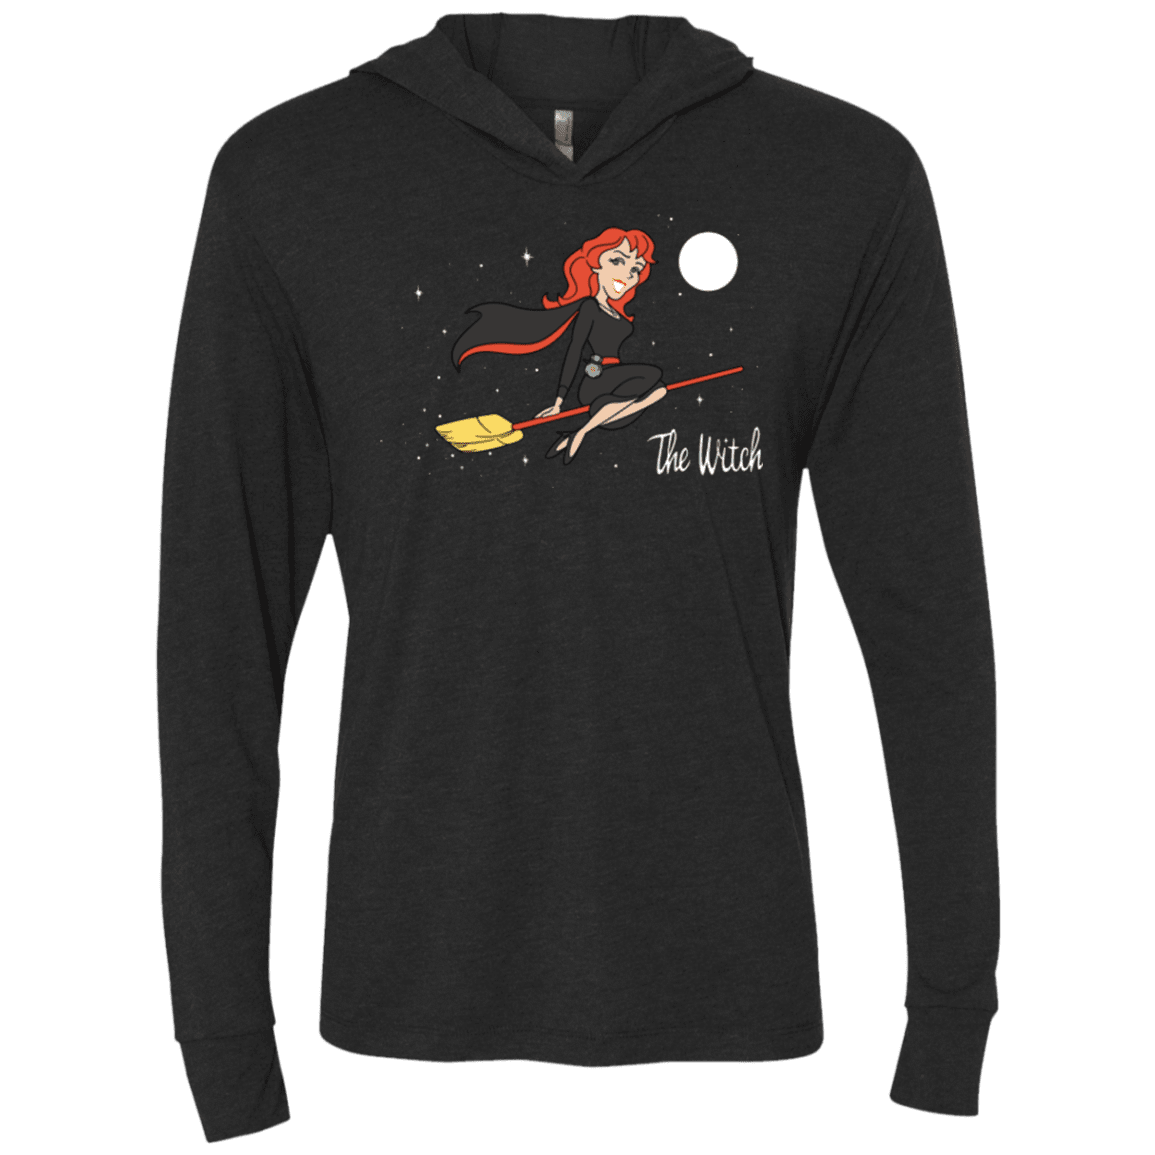 T-Shirts Vintage Black / X-Small The Witch Triblend Long Sleeve Hoodie Tee